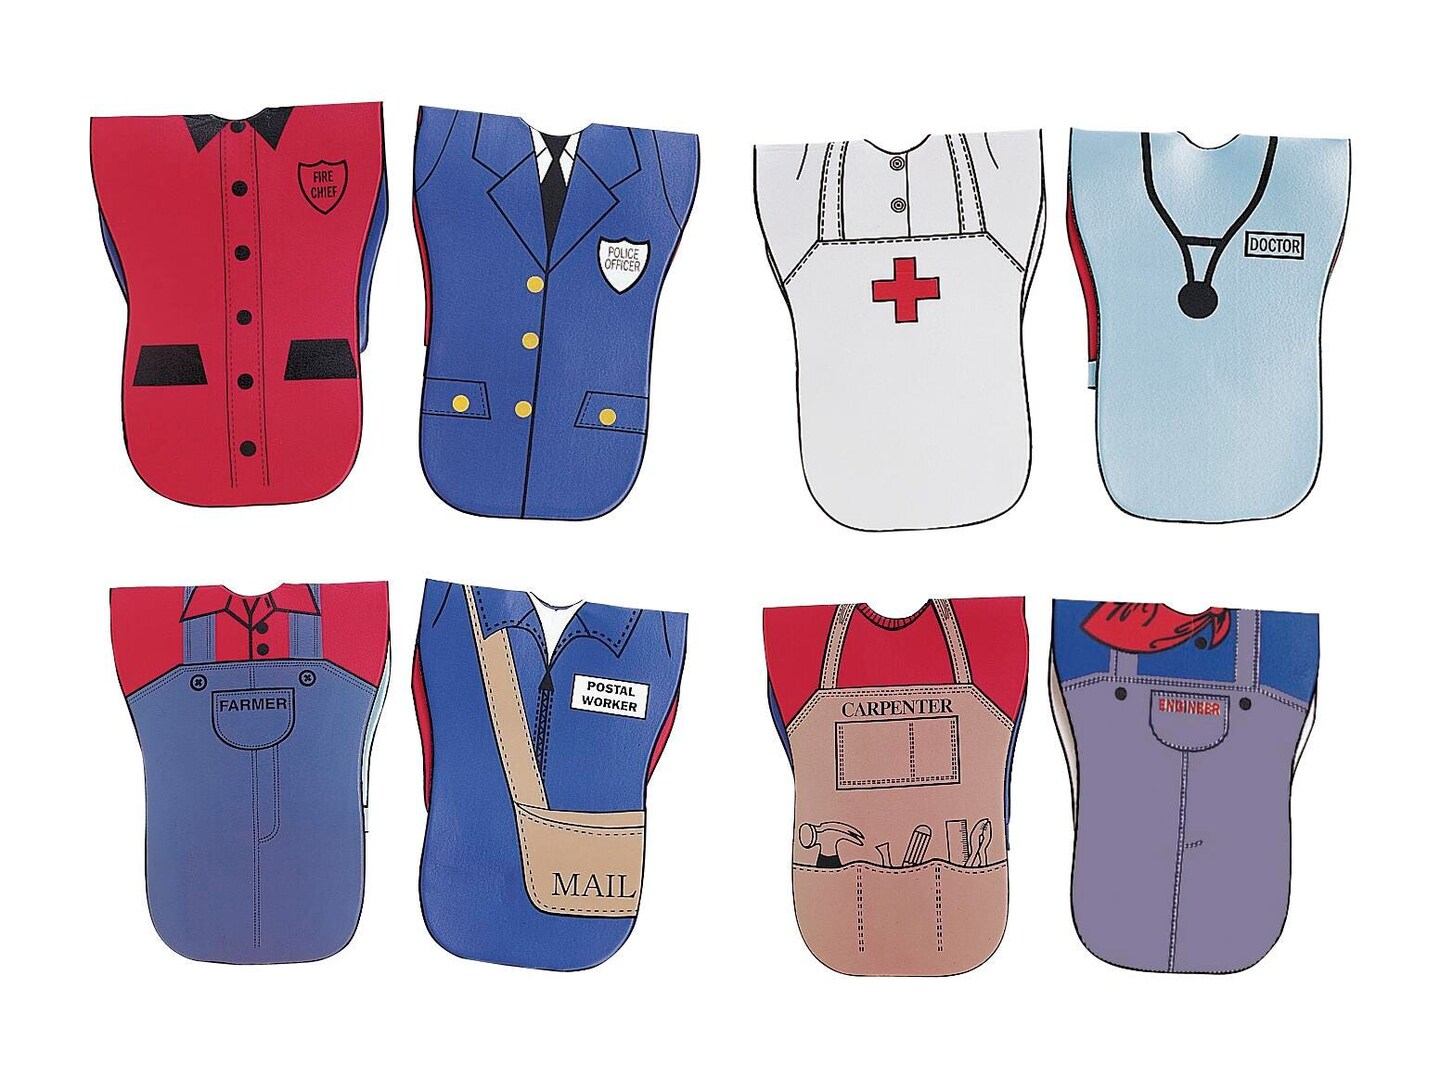 Childcraft Reversible Role Play Vests, Occupations, Set of 4